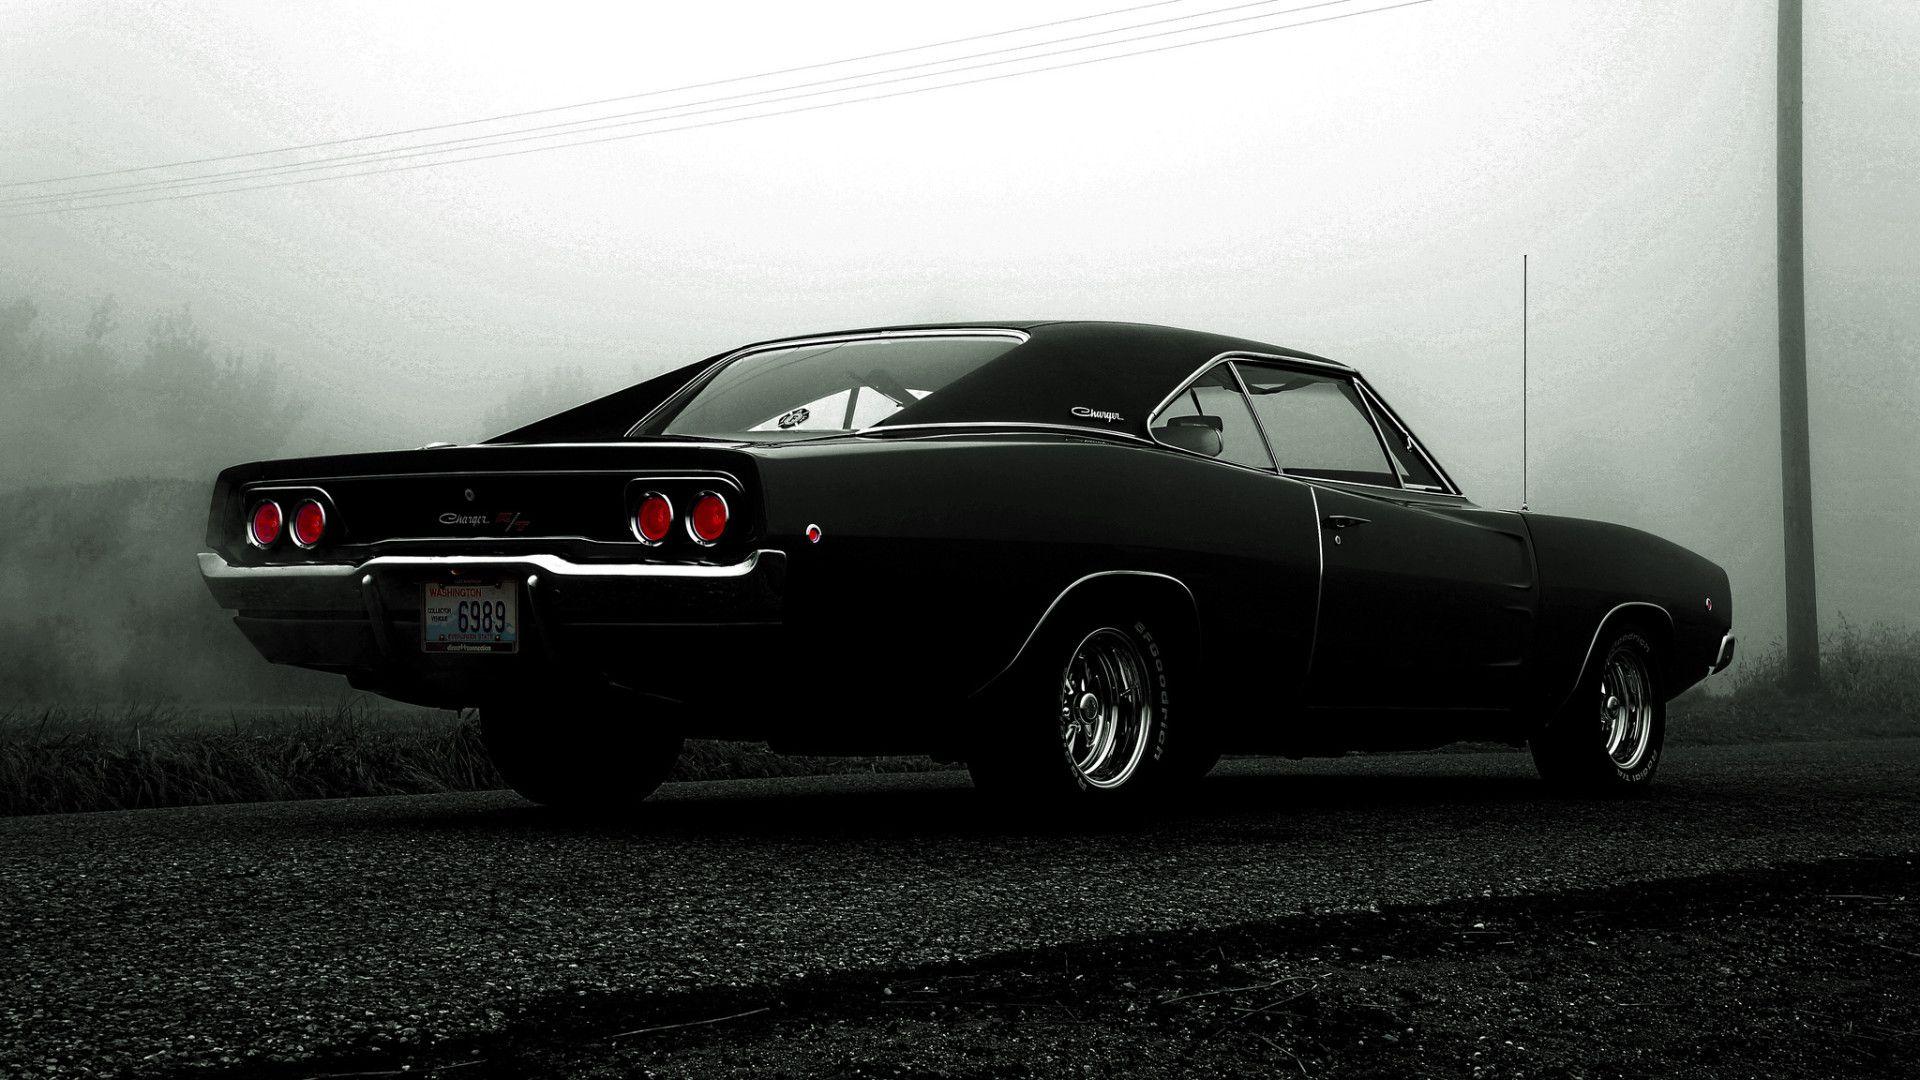 Dodge Charger Wallpaper High Resolution Full HD Preview Srt